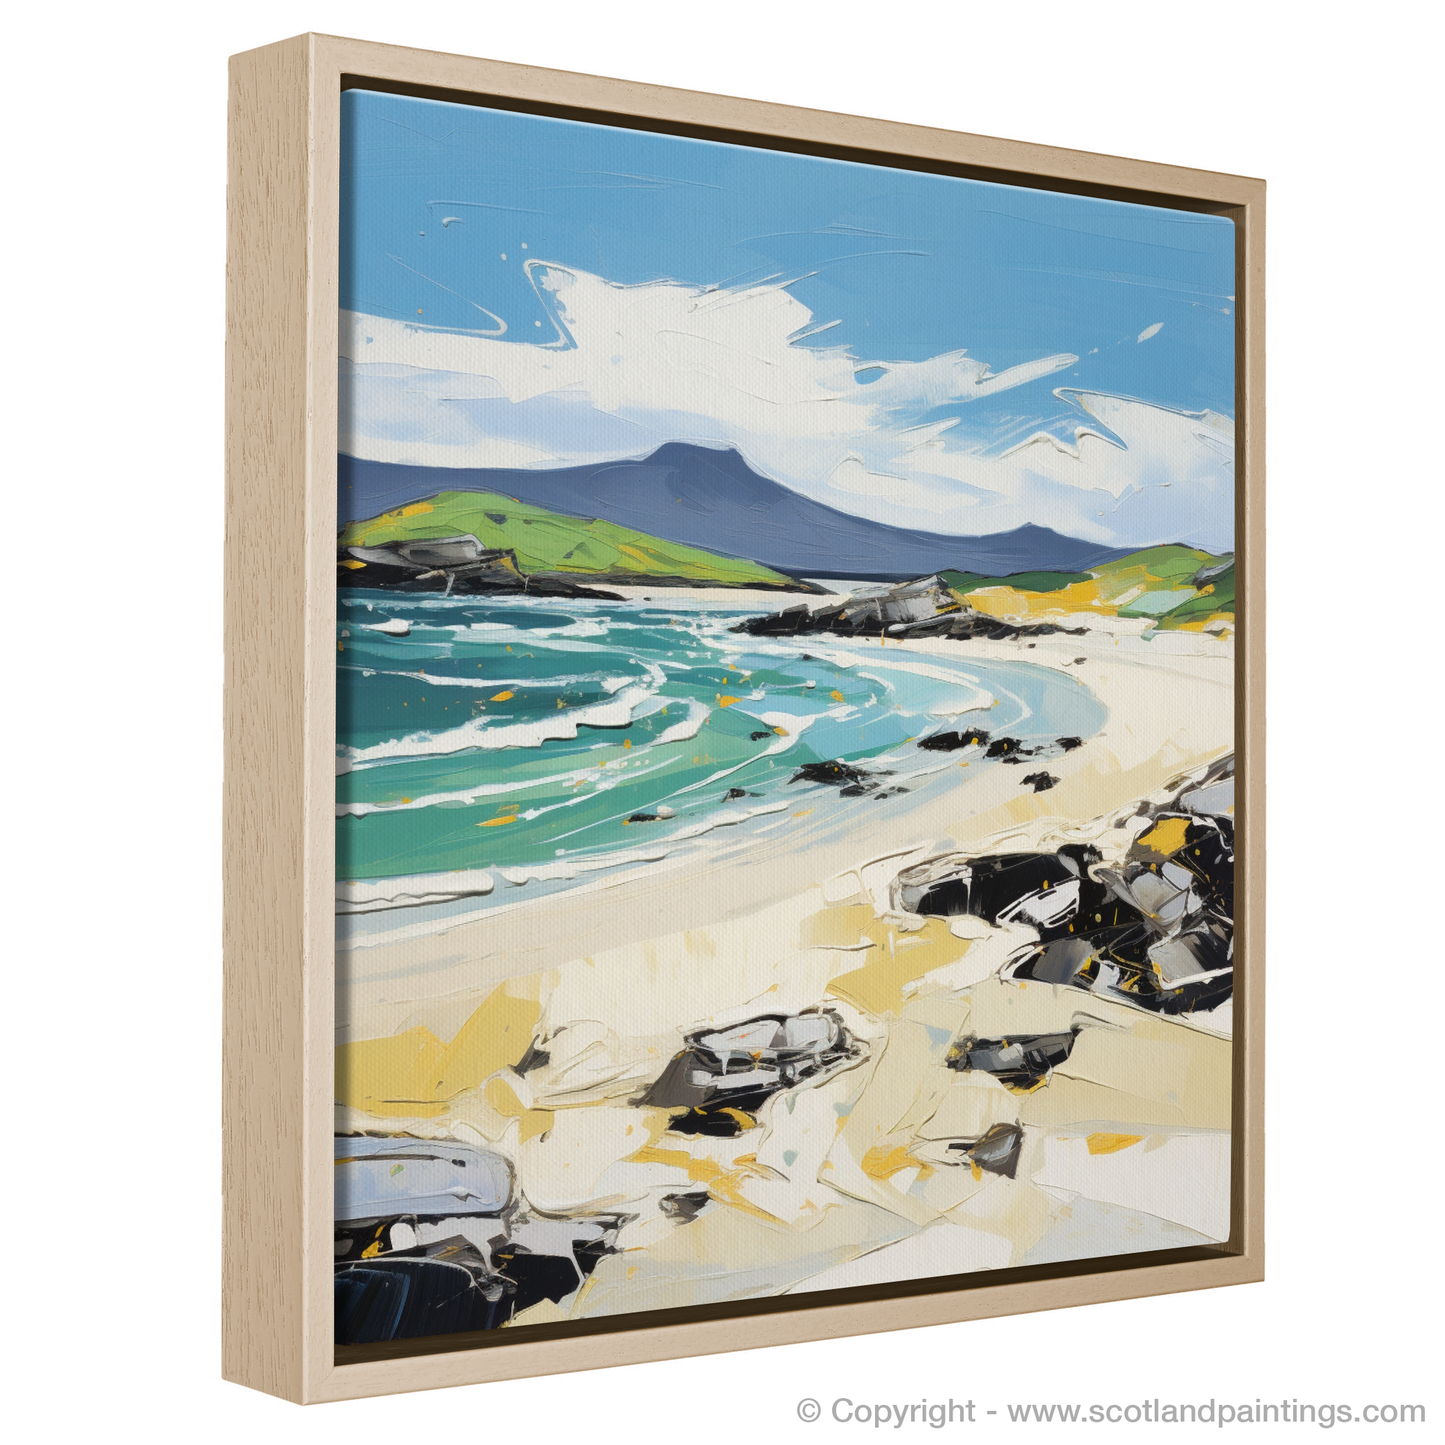 Painting and Art Print of Scarista Beach, Isle of Harris in summer entitled "Summer Serenade at Scarista Beach".